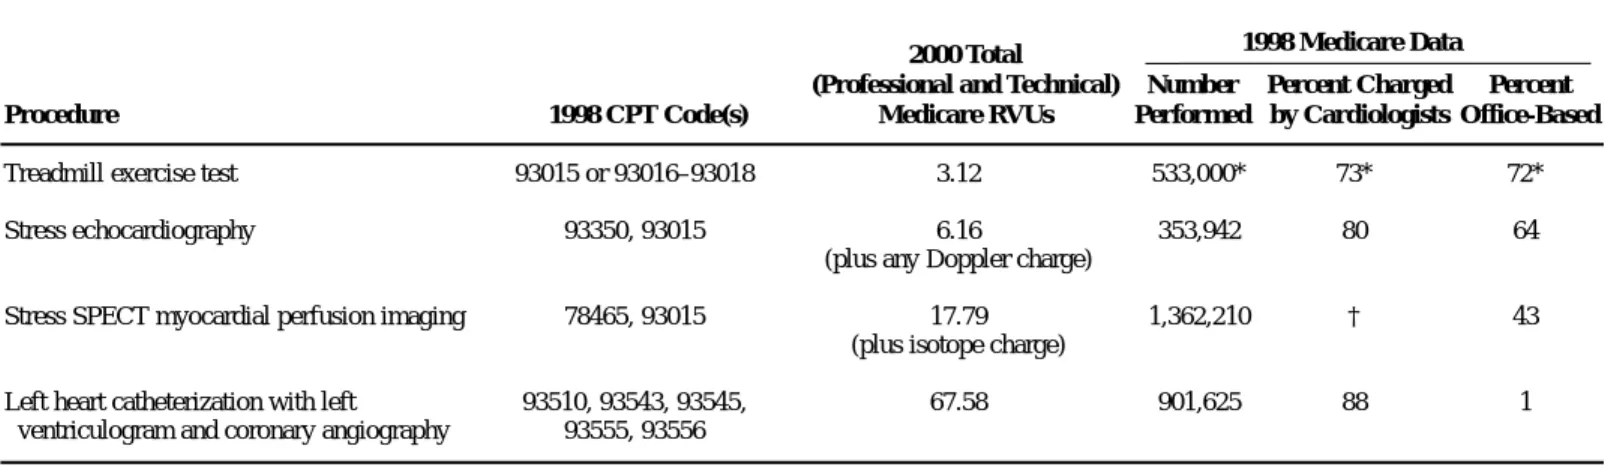 Table 3 is a comparison of year 2000 Medicare RVUs (rela- (rela-tive value units, professional and technical) for treadmill exercise testing and selected imaging procedures